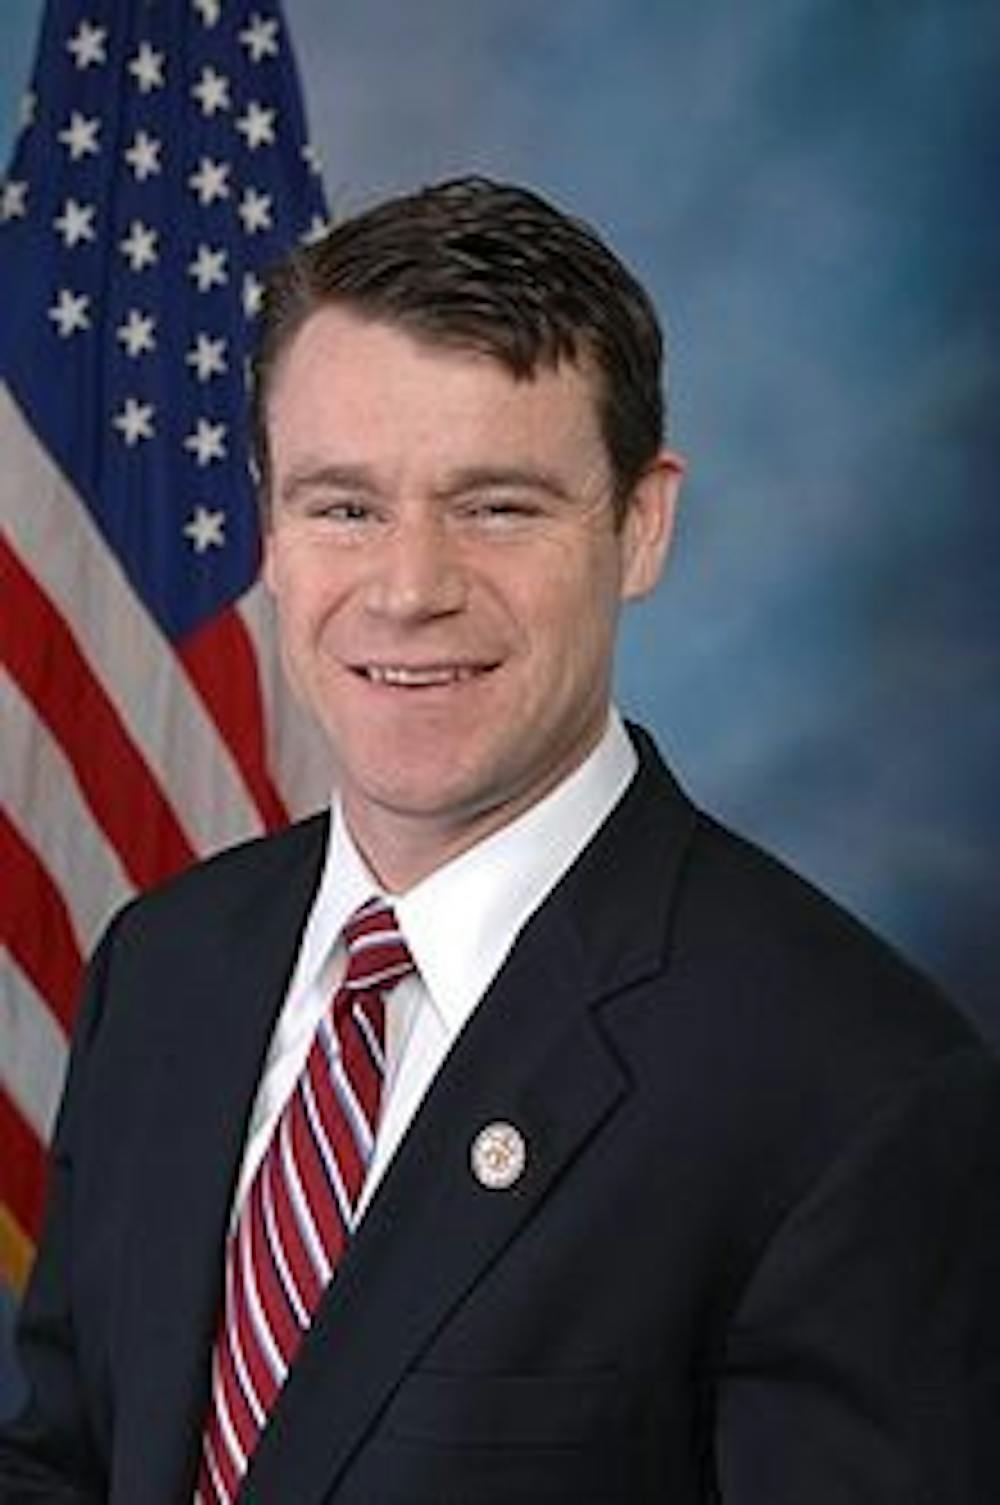 <p><em>Todd Young&nbsp;</em><i style="background-color: initial;">Wikipedia Commons // Photo Courtesy</i></p>